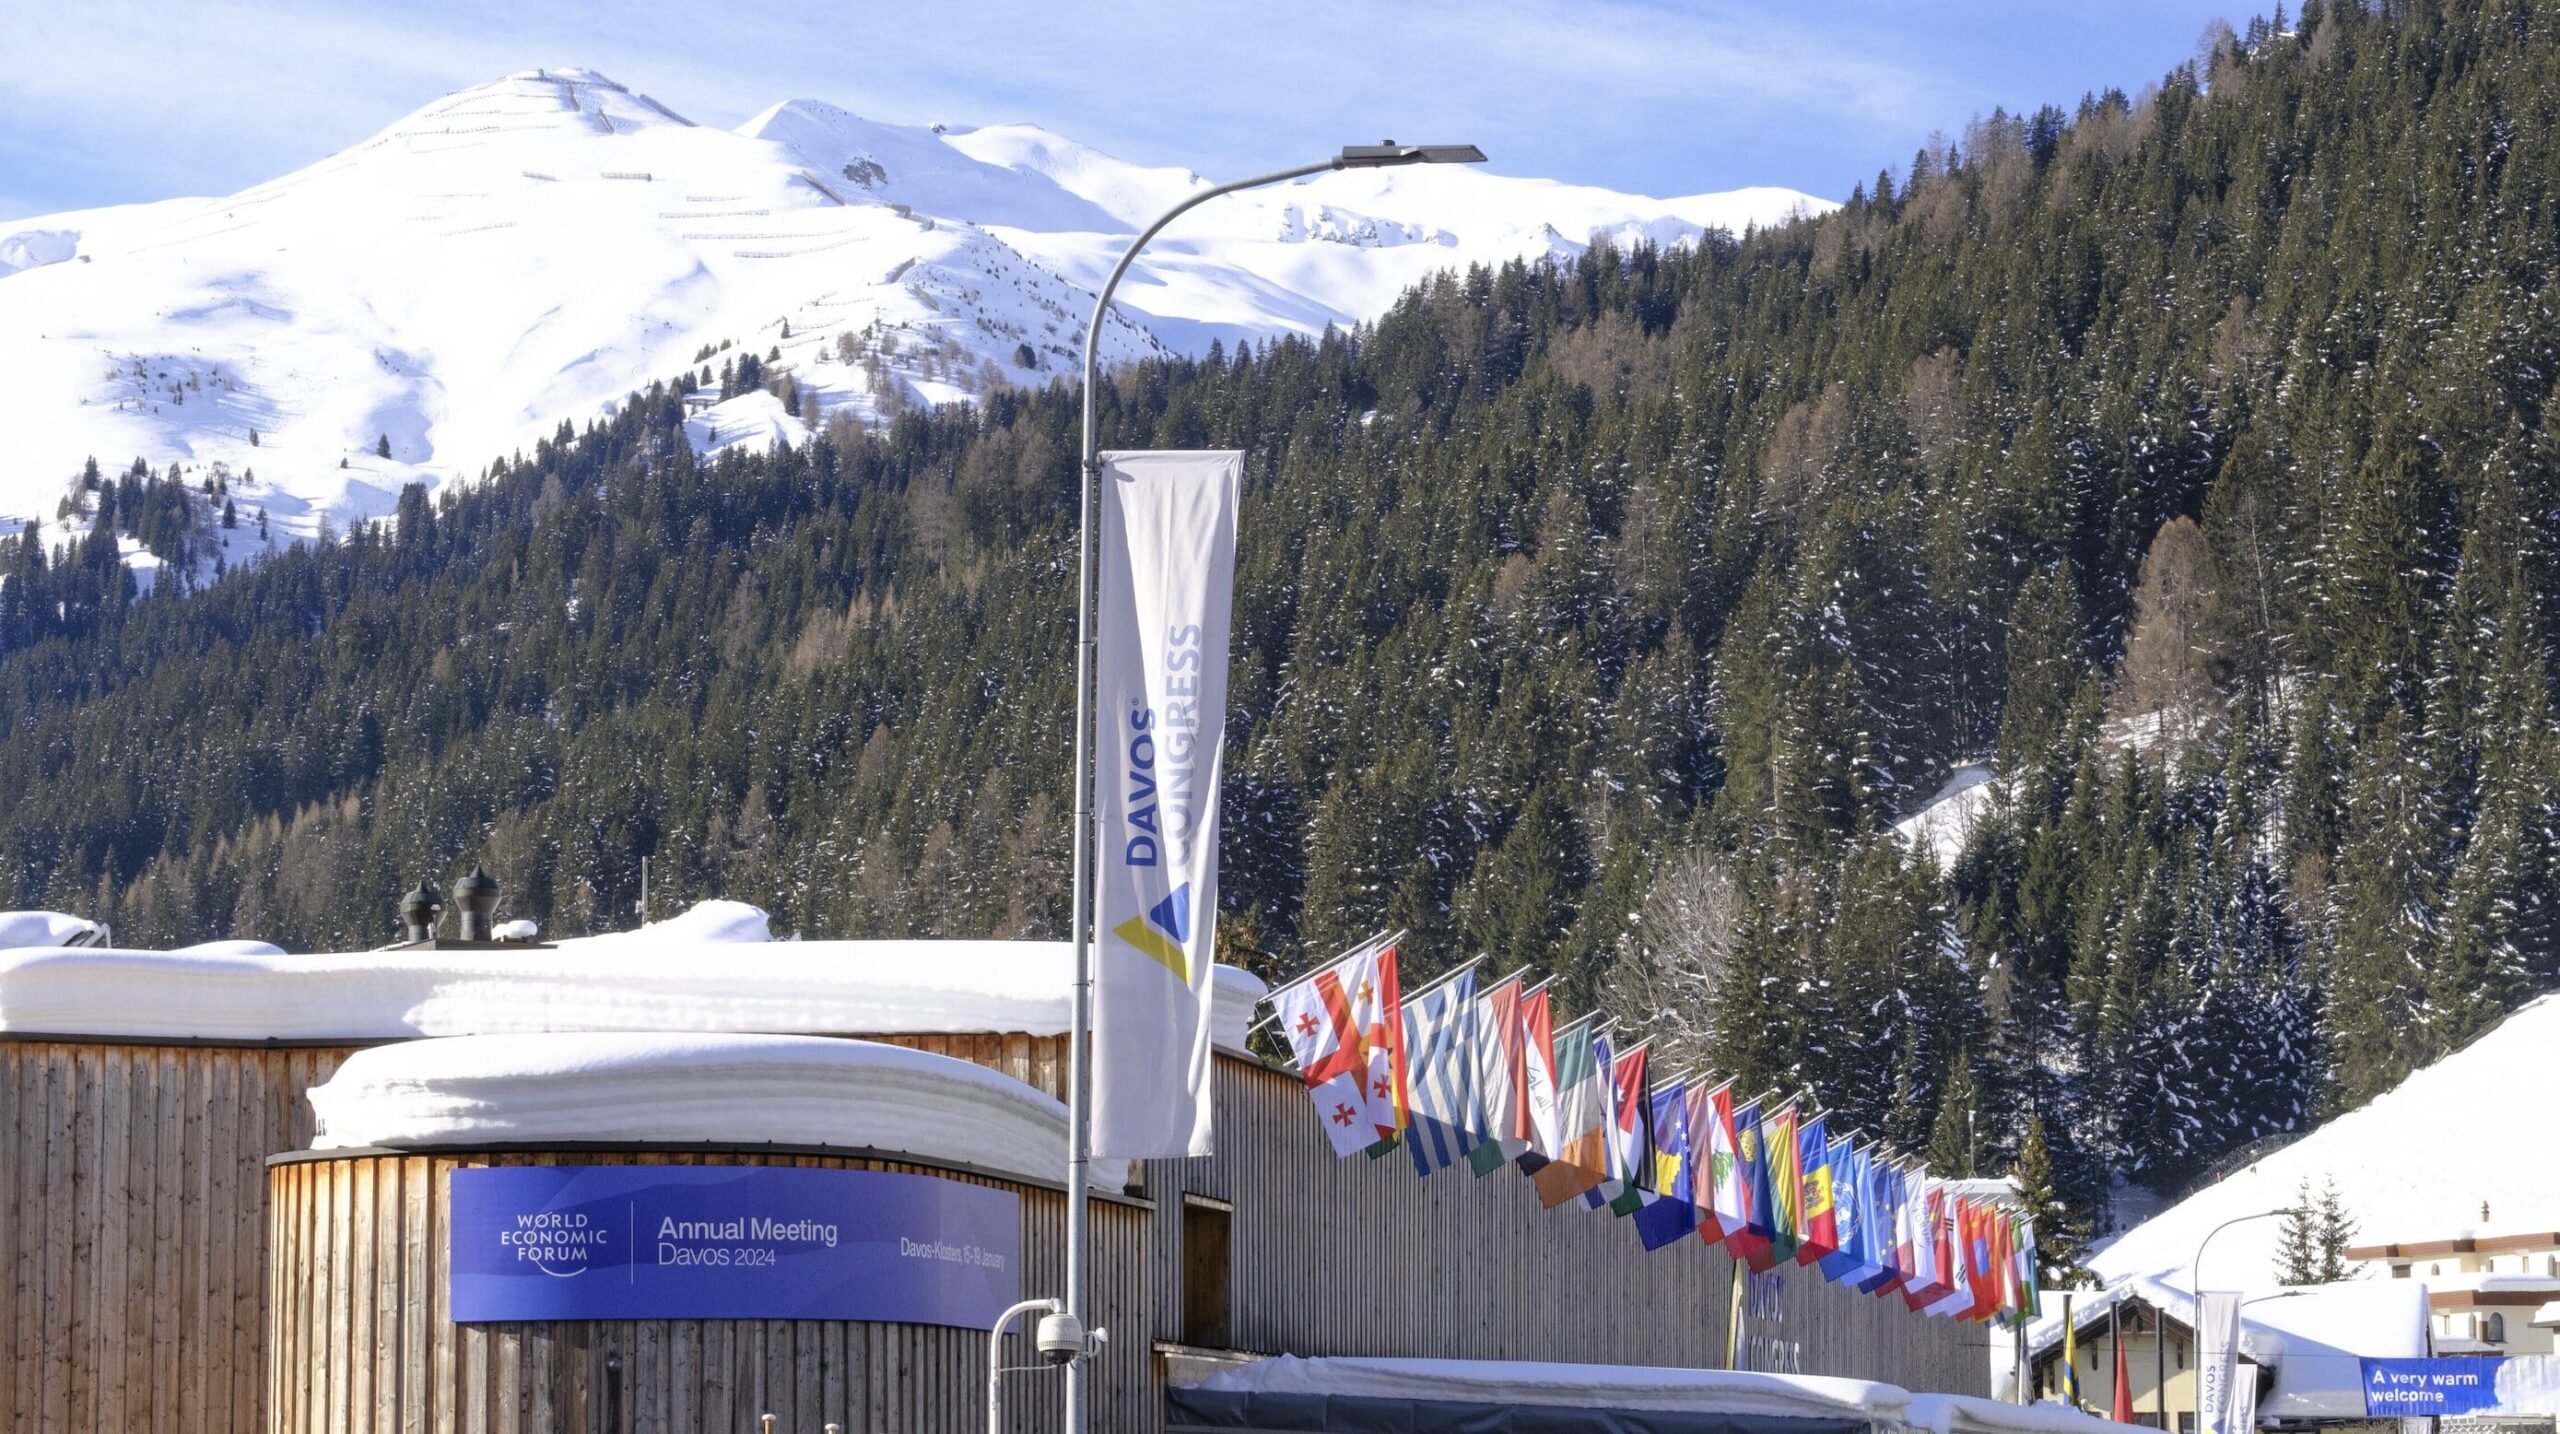 The Annual Meeting Congress Centre in Davos